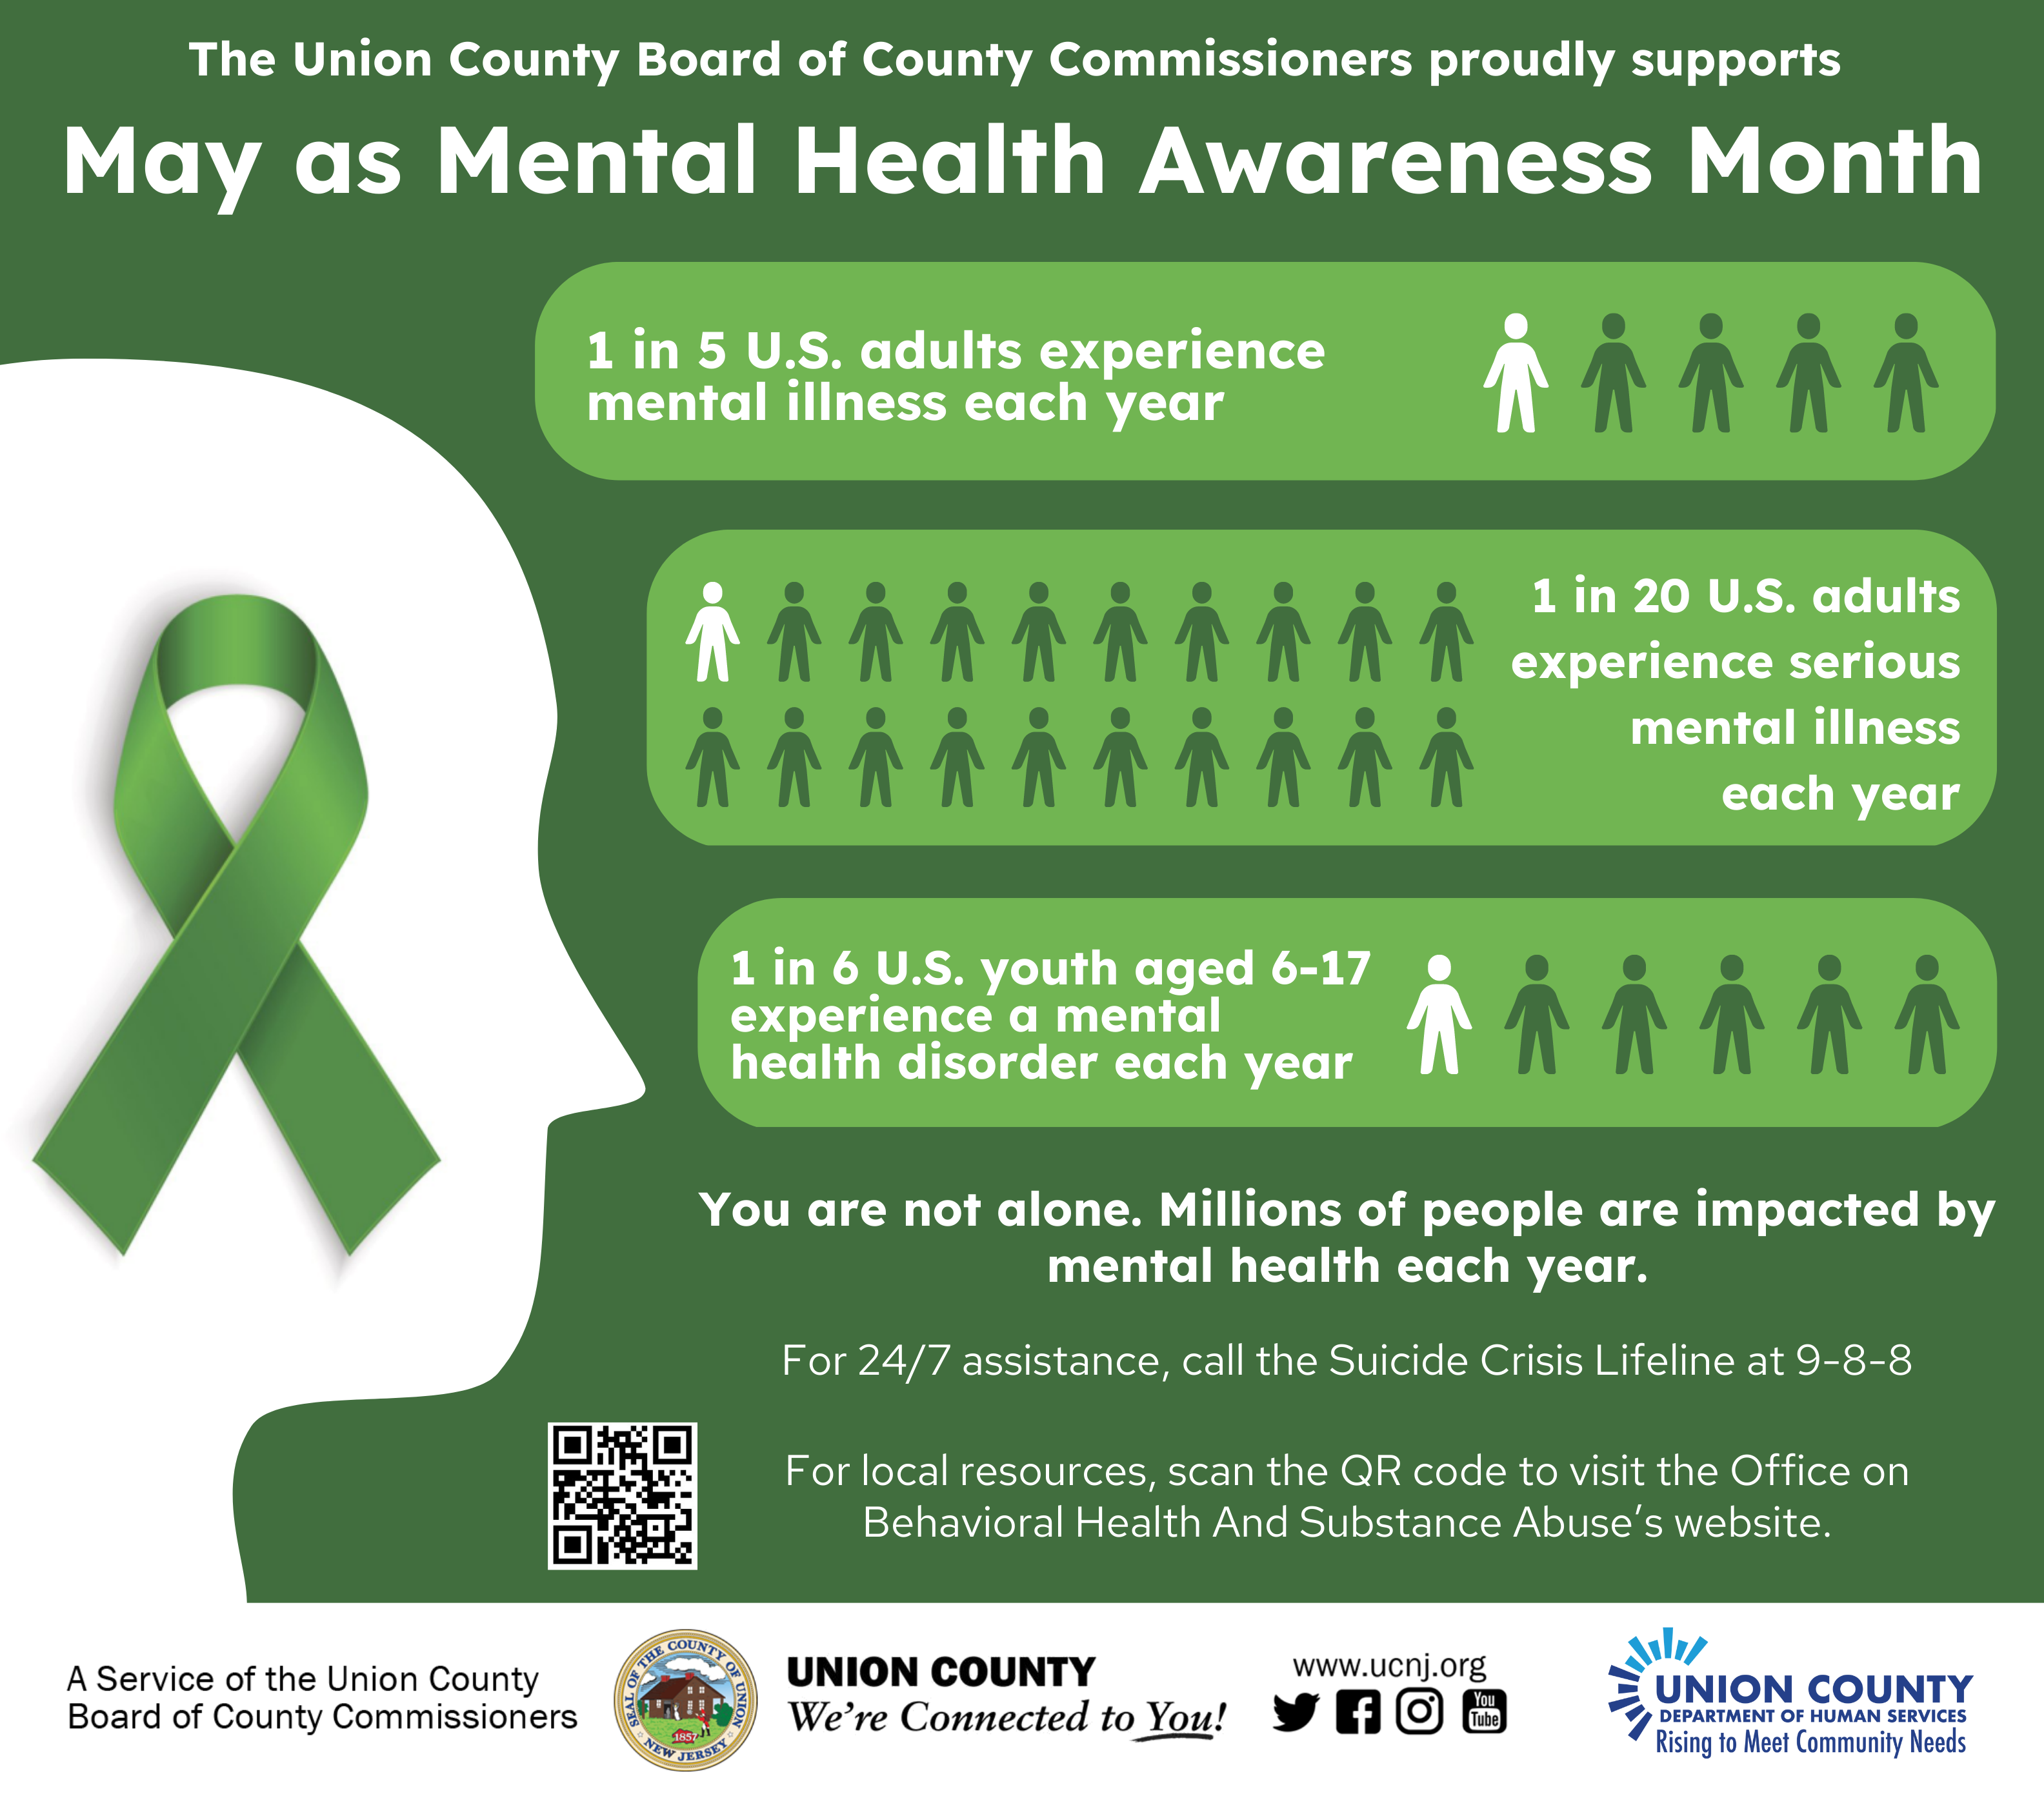 union-county-observes-national-mental-health-awareness-month-county